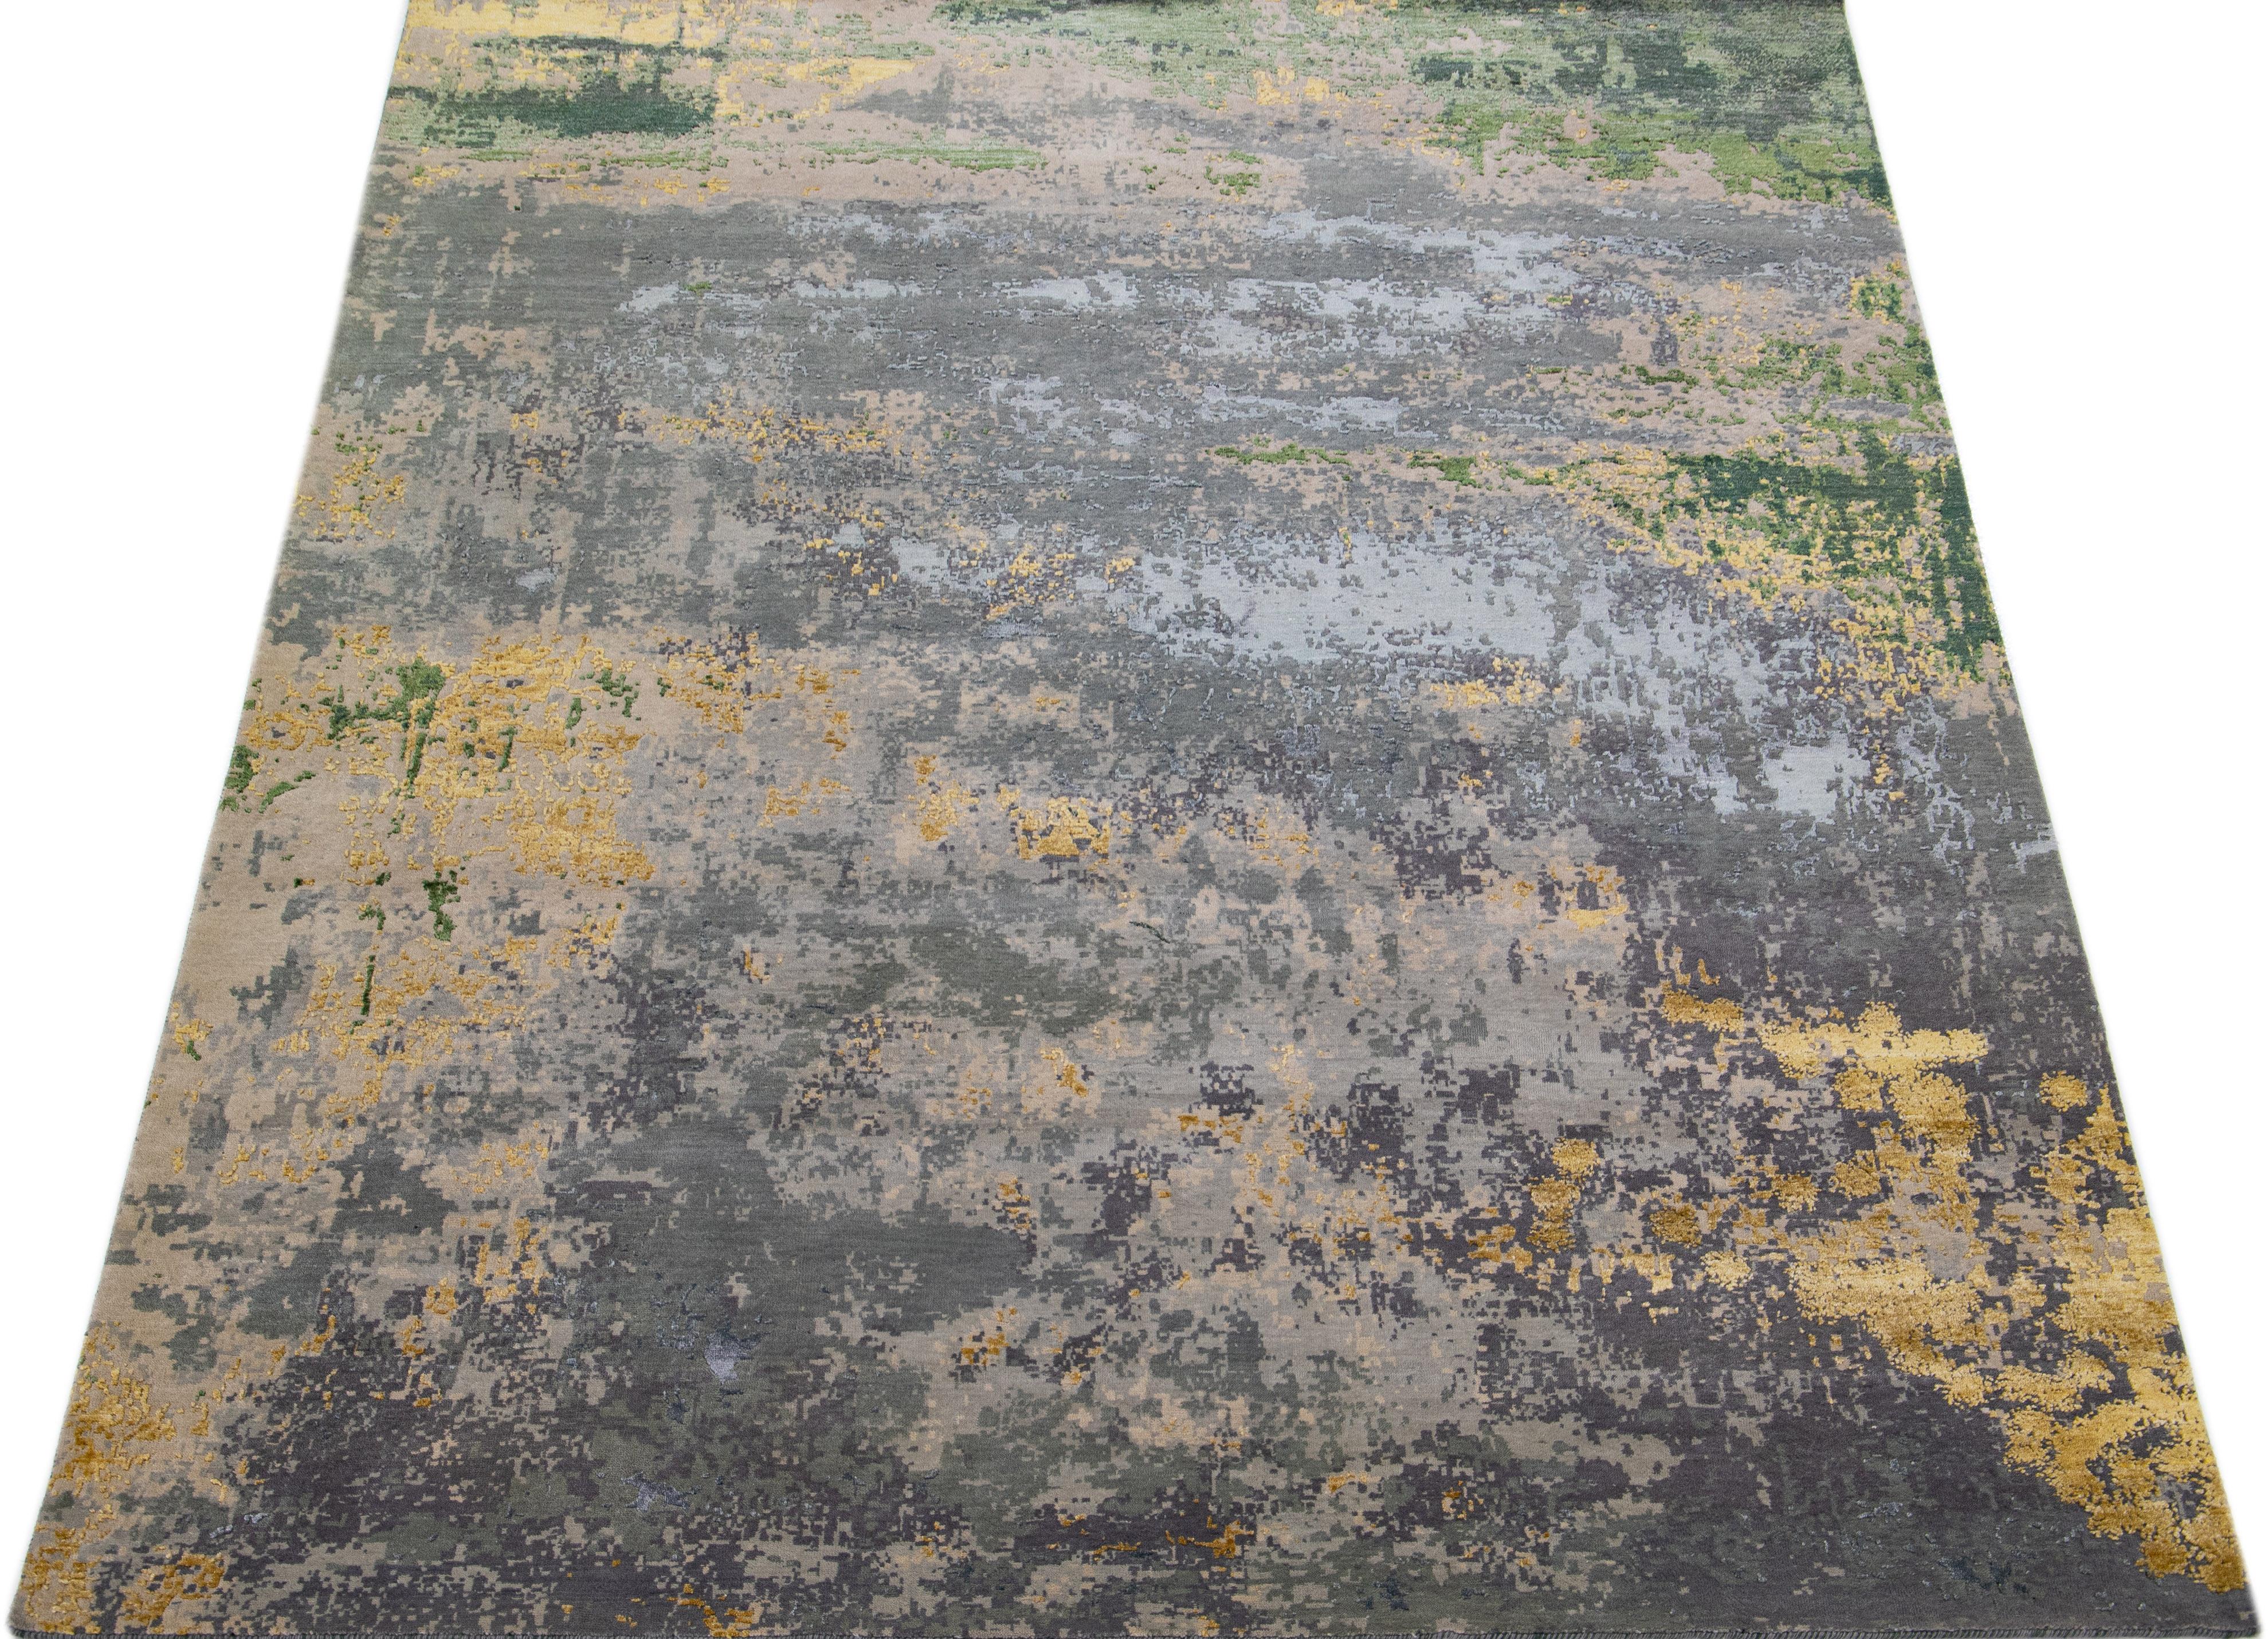 This Indian wool and silk blend rug features a gray field with an abstract pattern detailing golden and green colors. Its composed materials provide robustness and longevity, while its ornamental design infuses any room with sophistication.

This